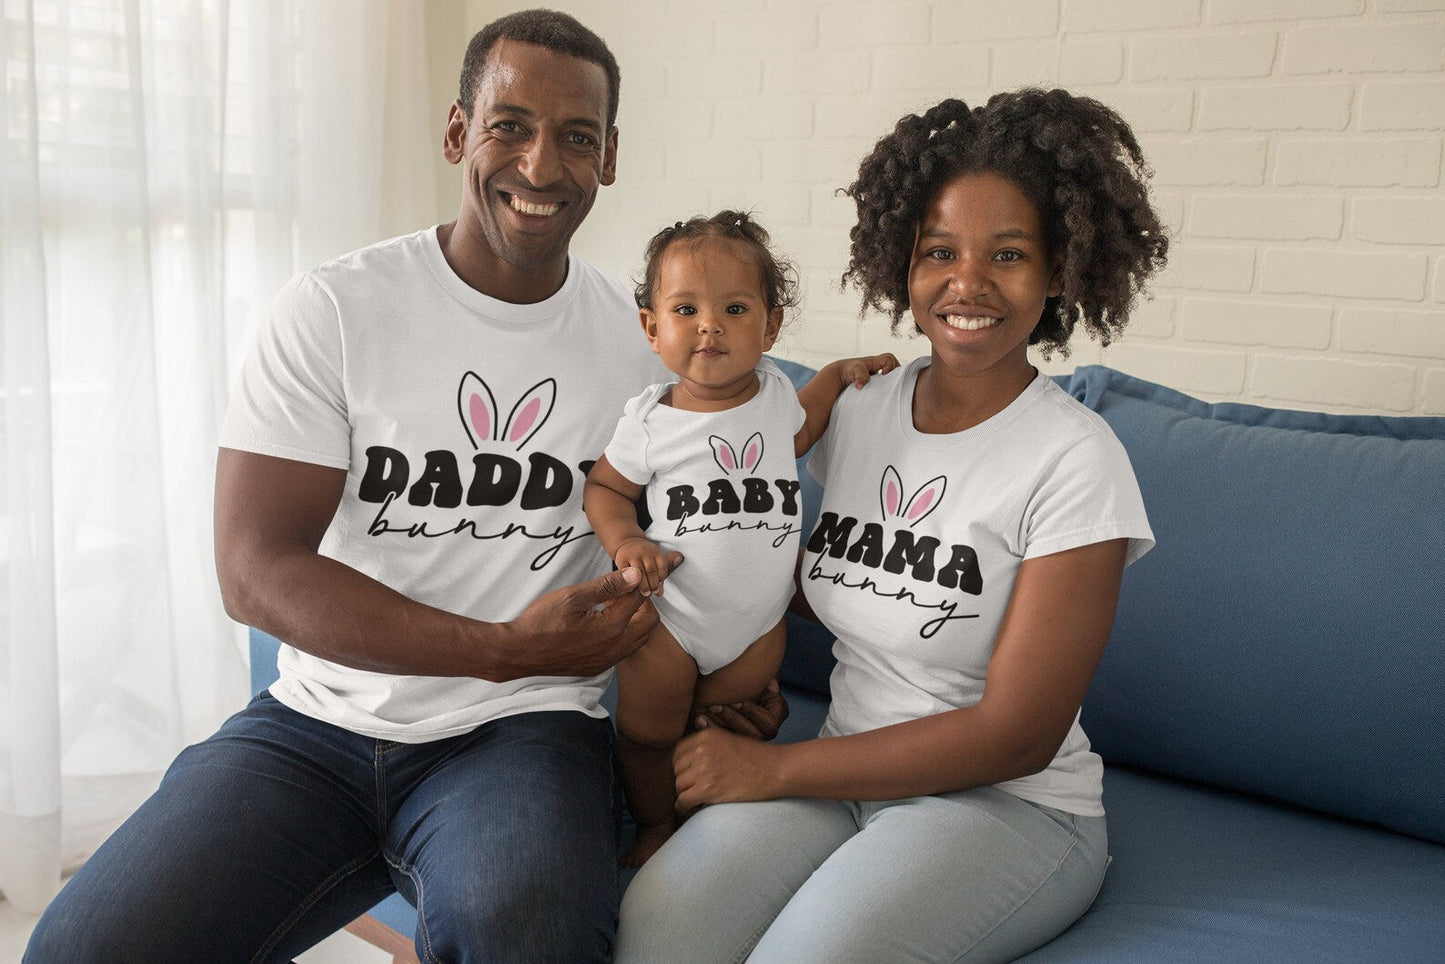 Personalised Family Bunny T-shirts